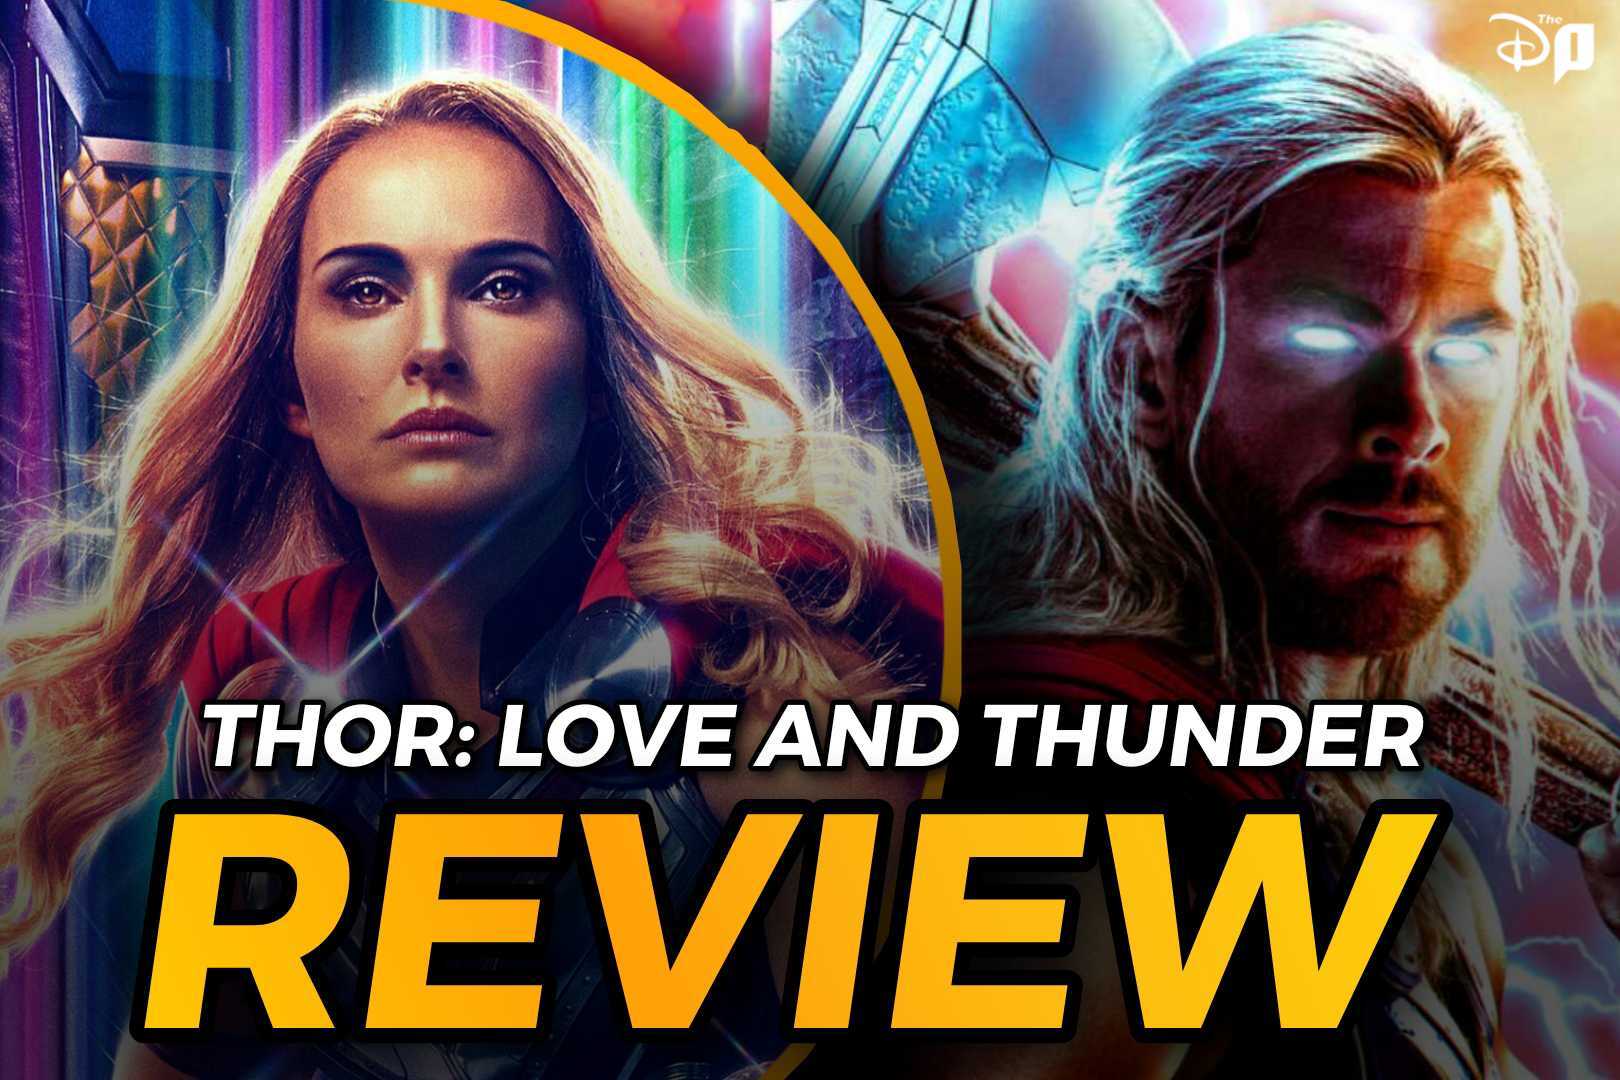 ‘Thor: Love And Thunder’ Review: A Funderful and Thunder-filled Adventure-Comedy